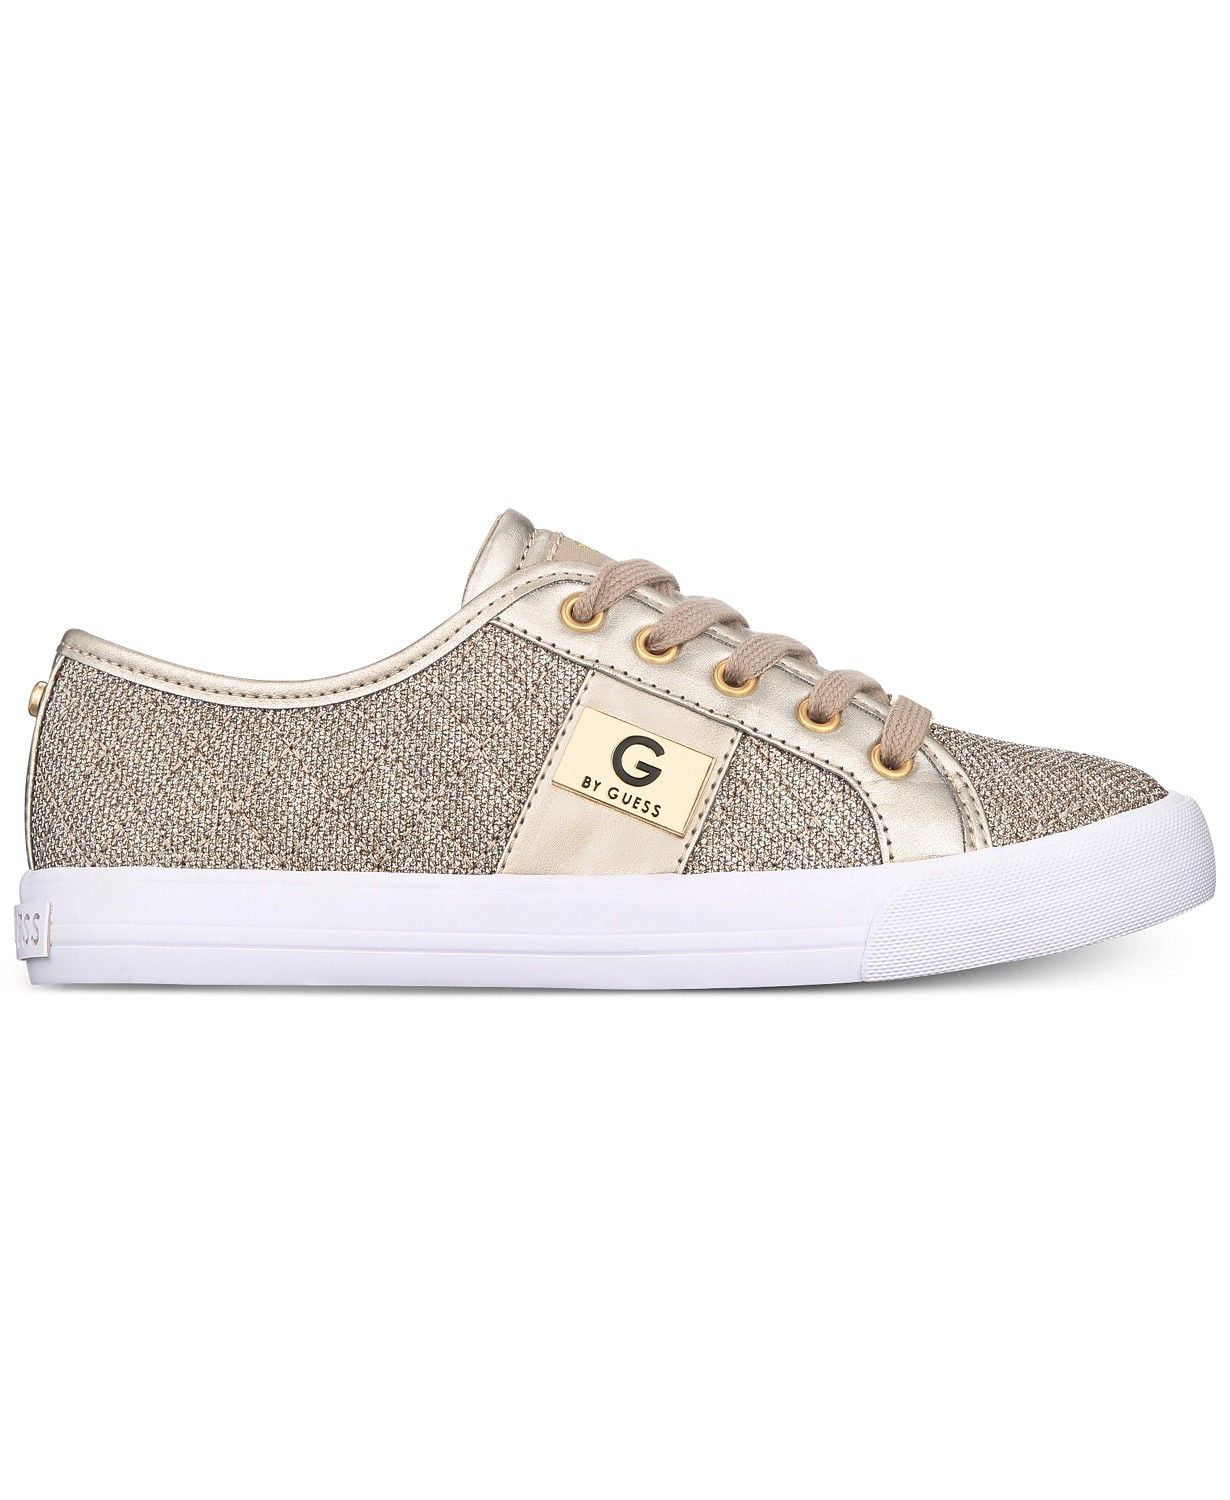 G by Guess Women's Lace Up Leather Quilted Fabric Glitter Sneakers Shoes (6) - Walmart.com